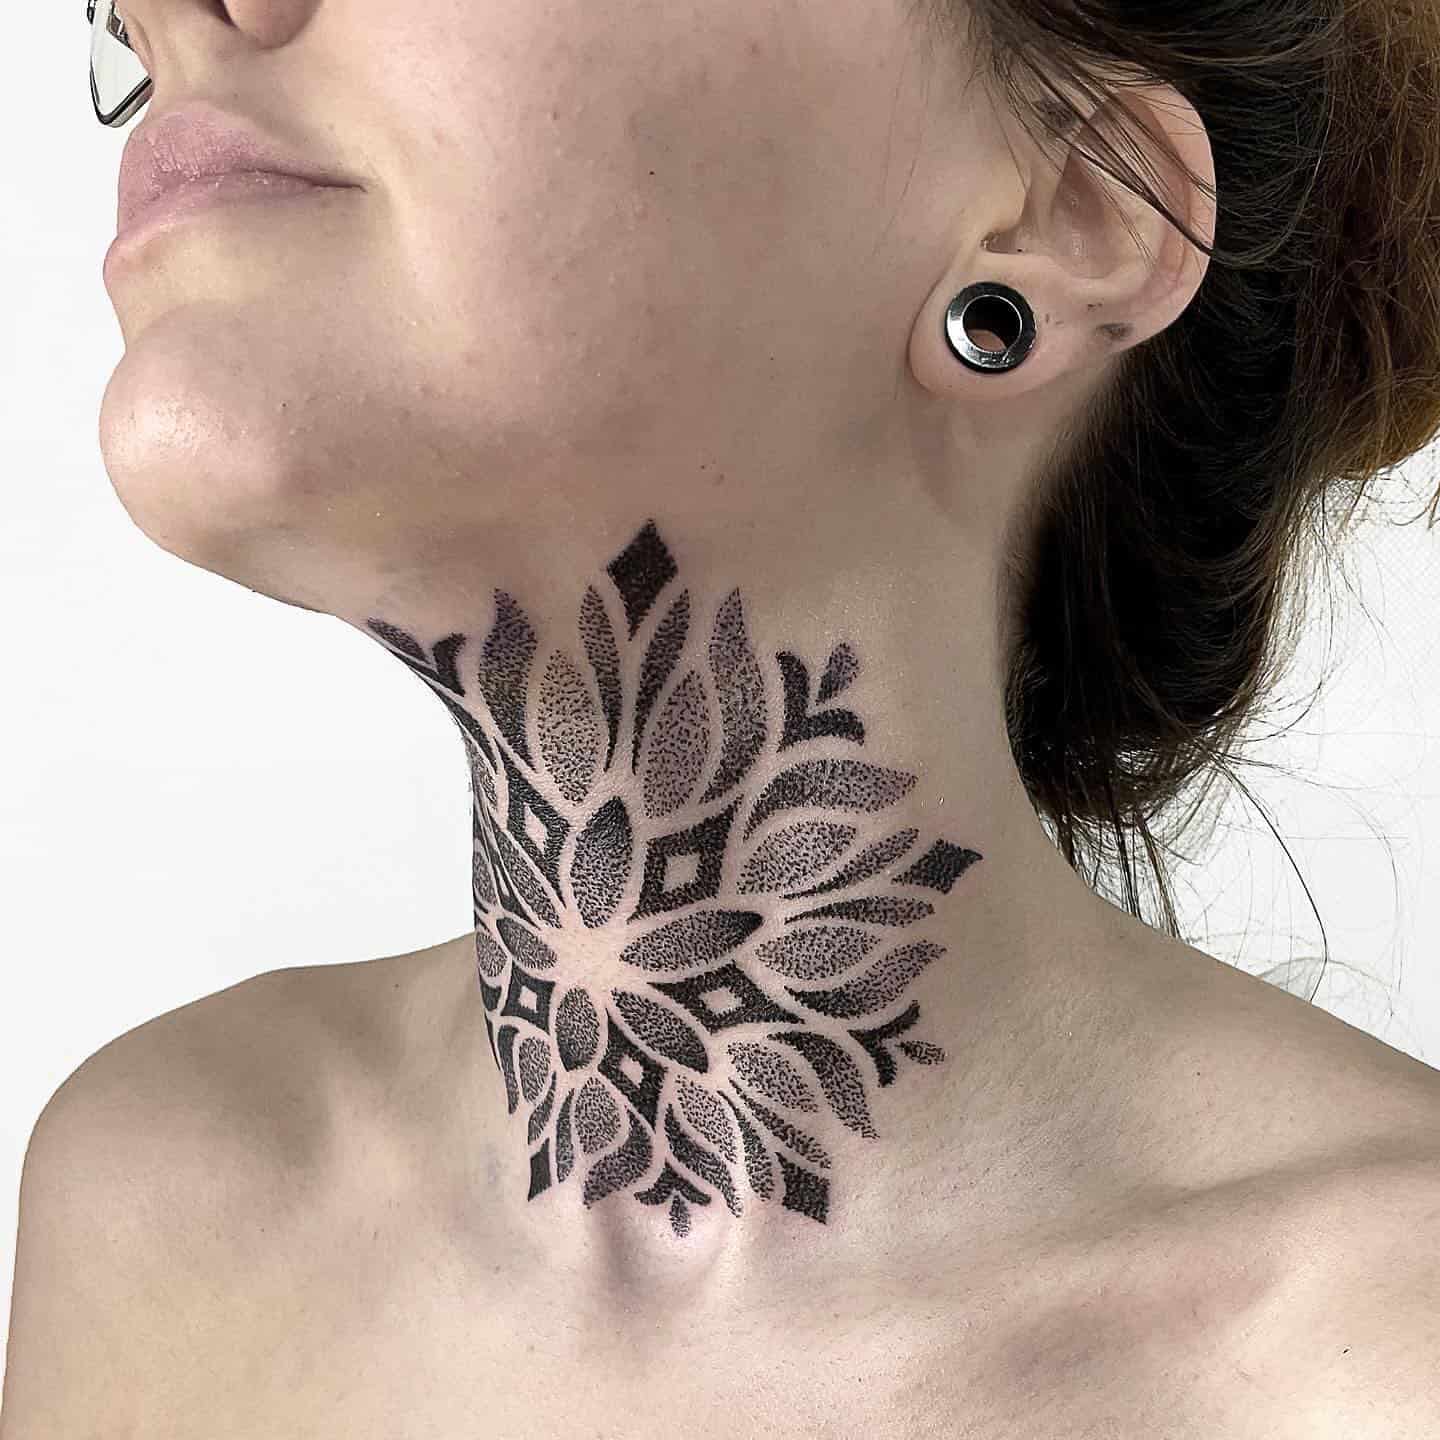 40 Awesome Neck Tattoo Ideas for Men & Women in 2023